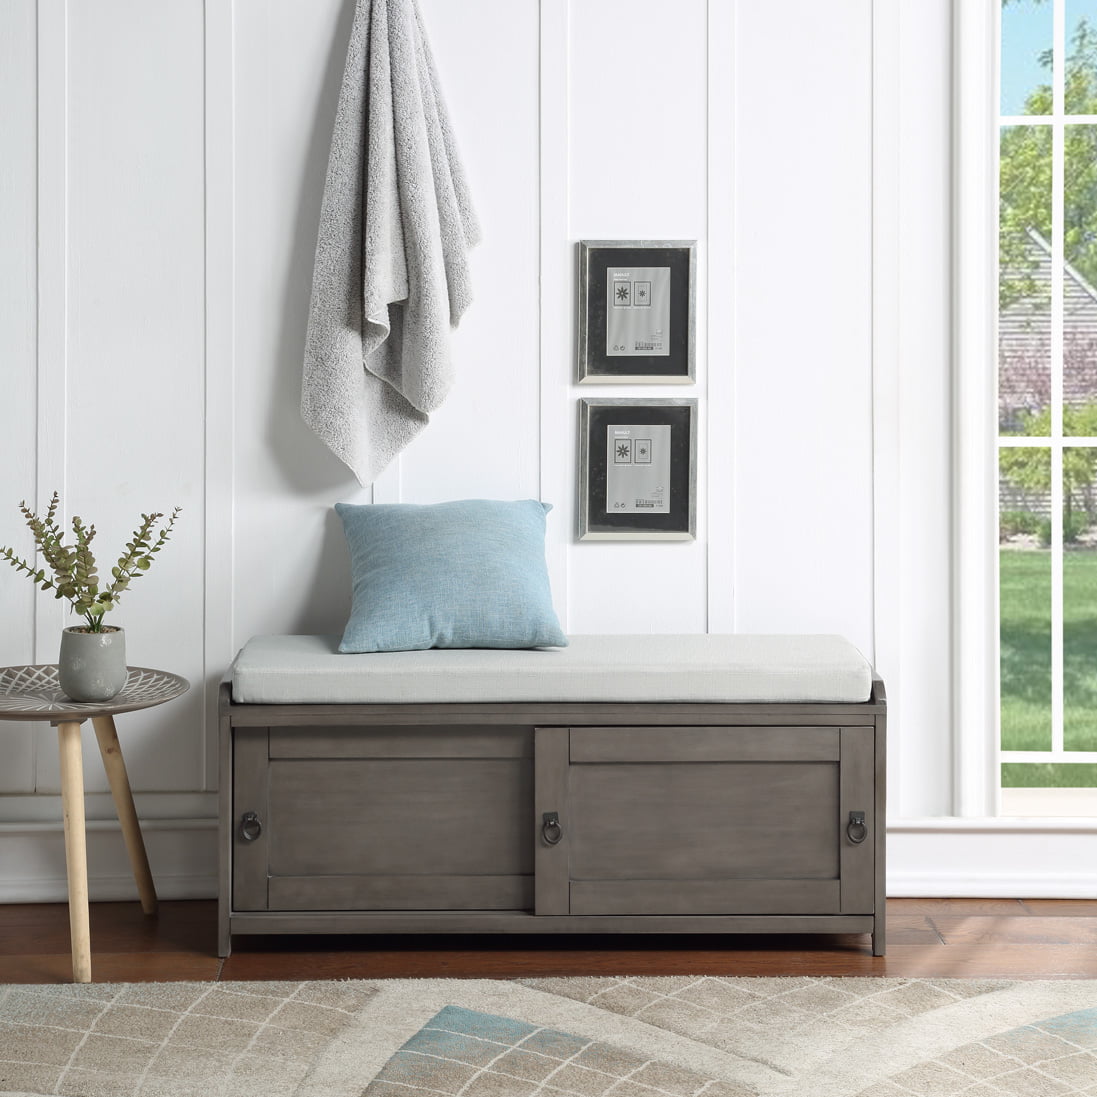 Entryway Bench With Storage Drawer